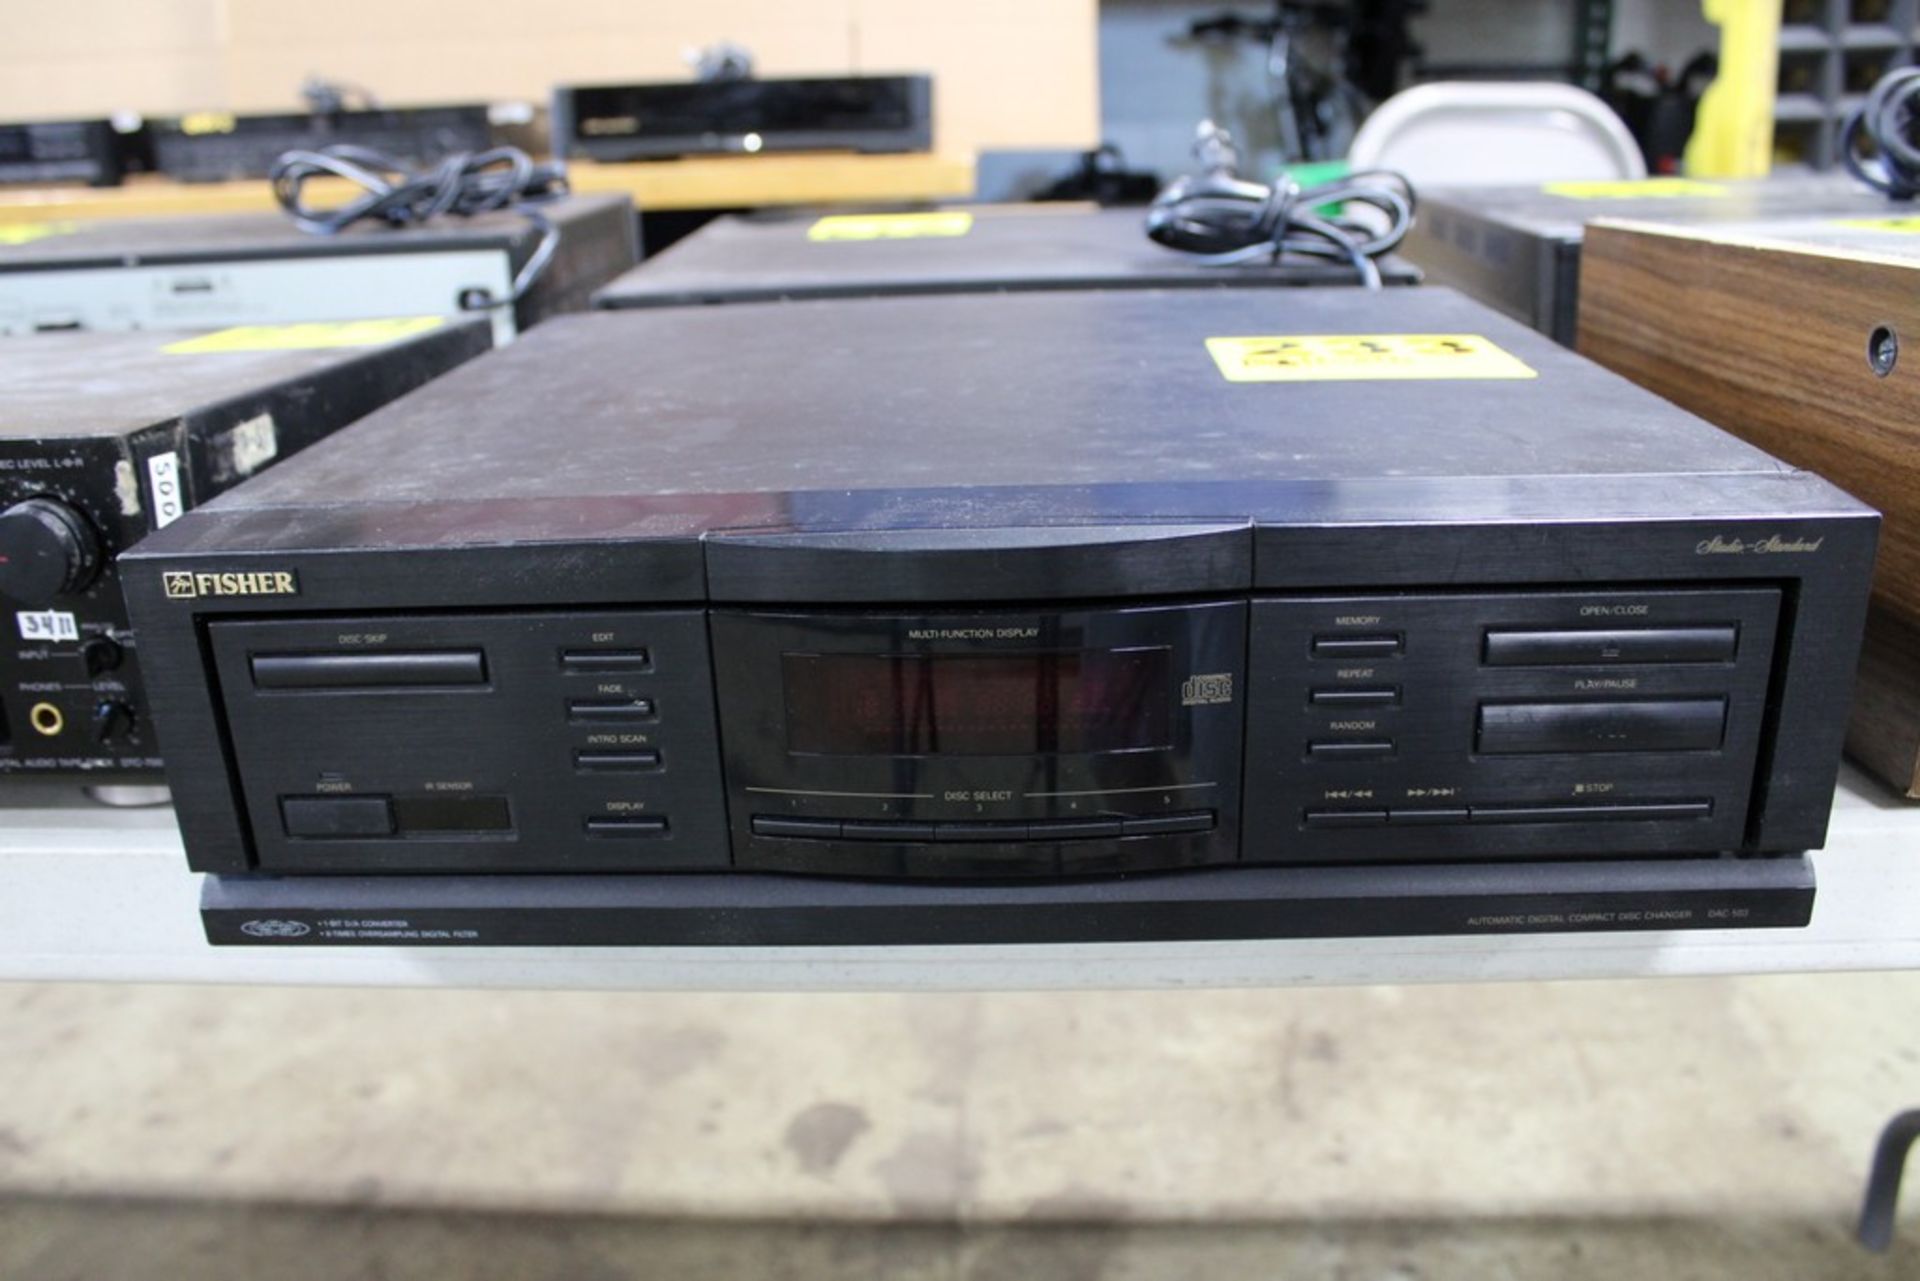 FISHER MODEL DAC-503 AUTOMATIC DIGITAL COMPACT DISC PLAYER - Image 2 of 2